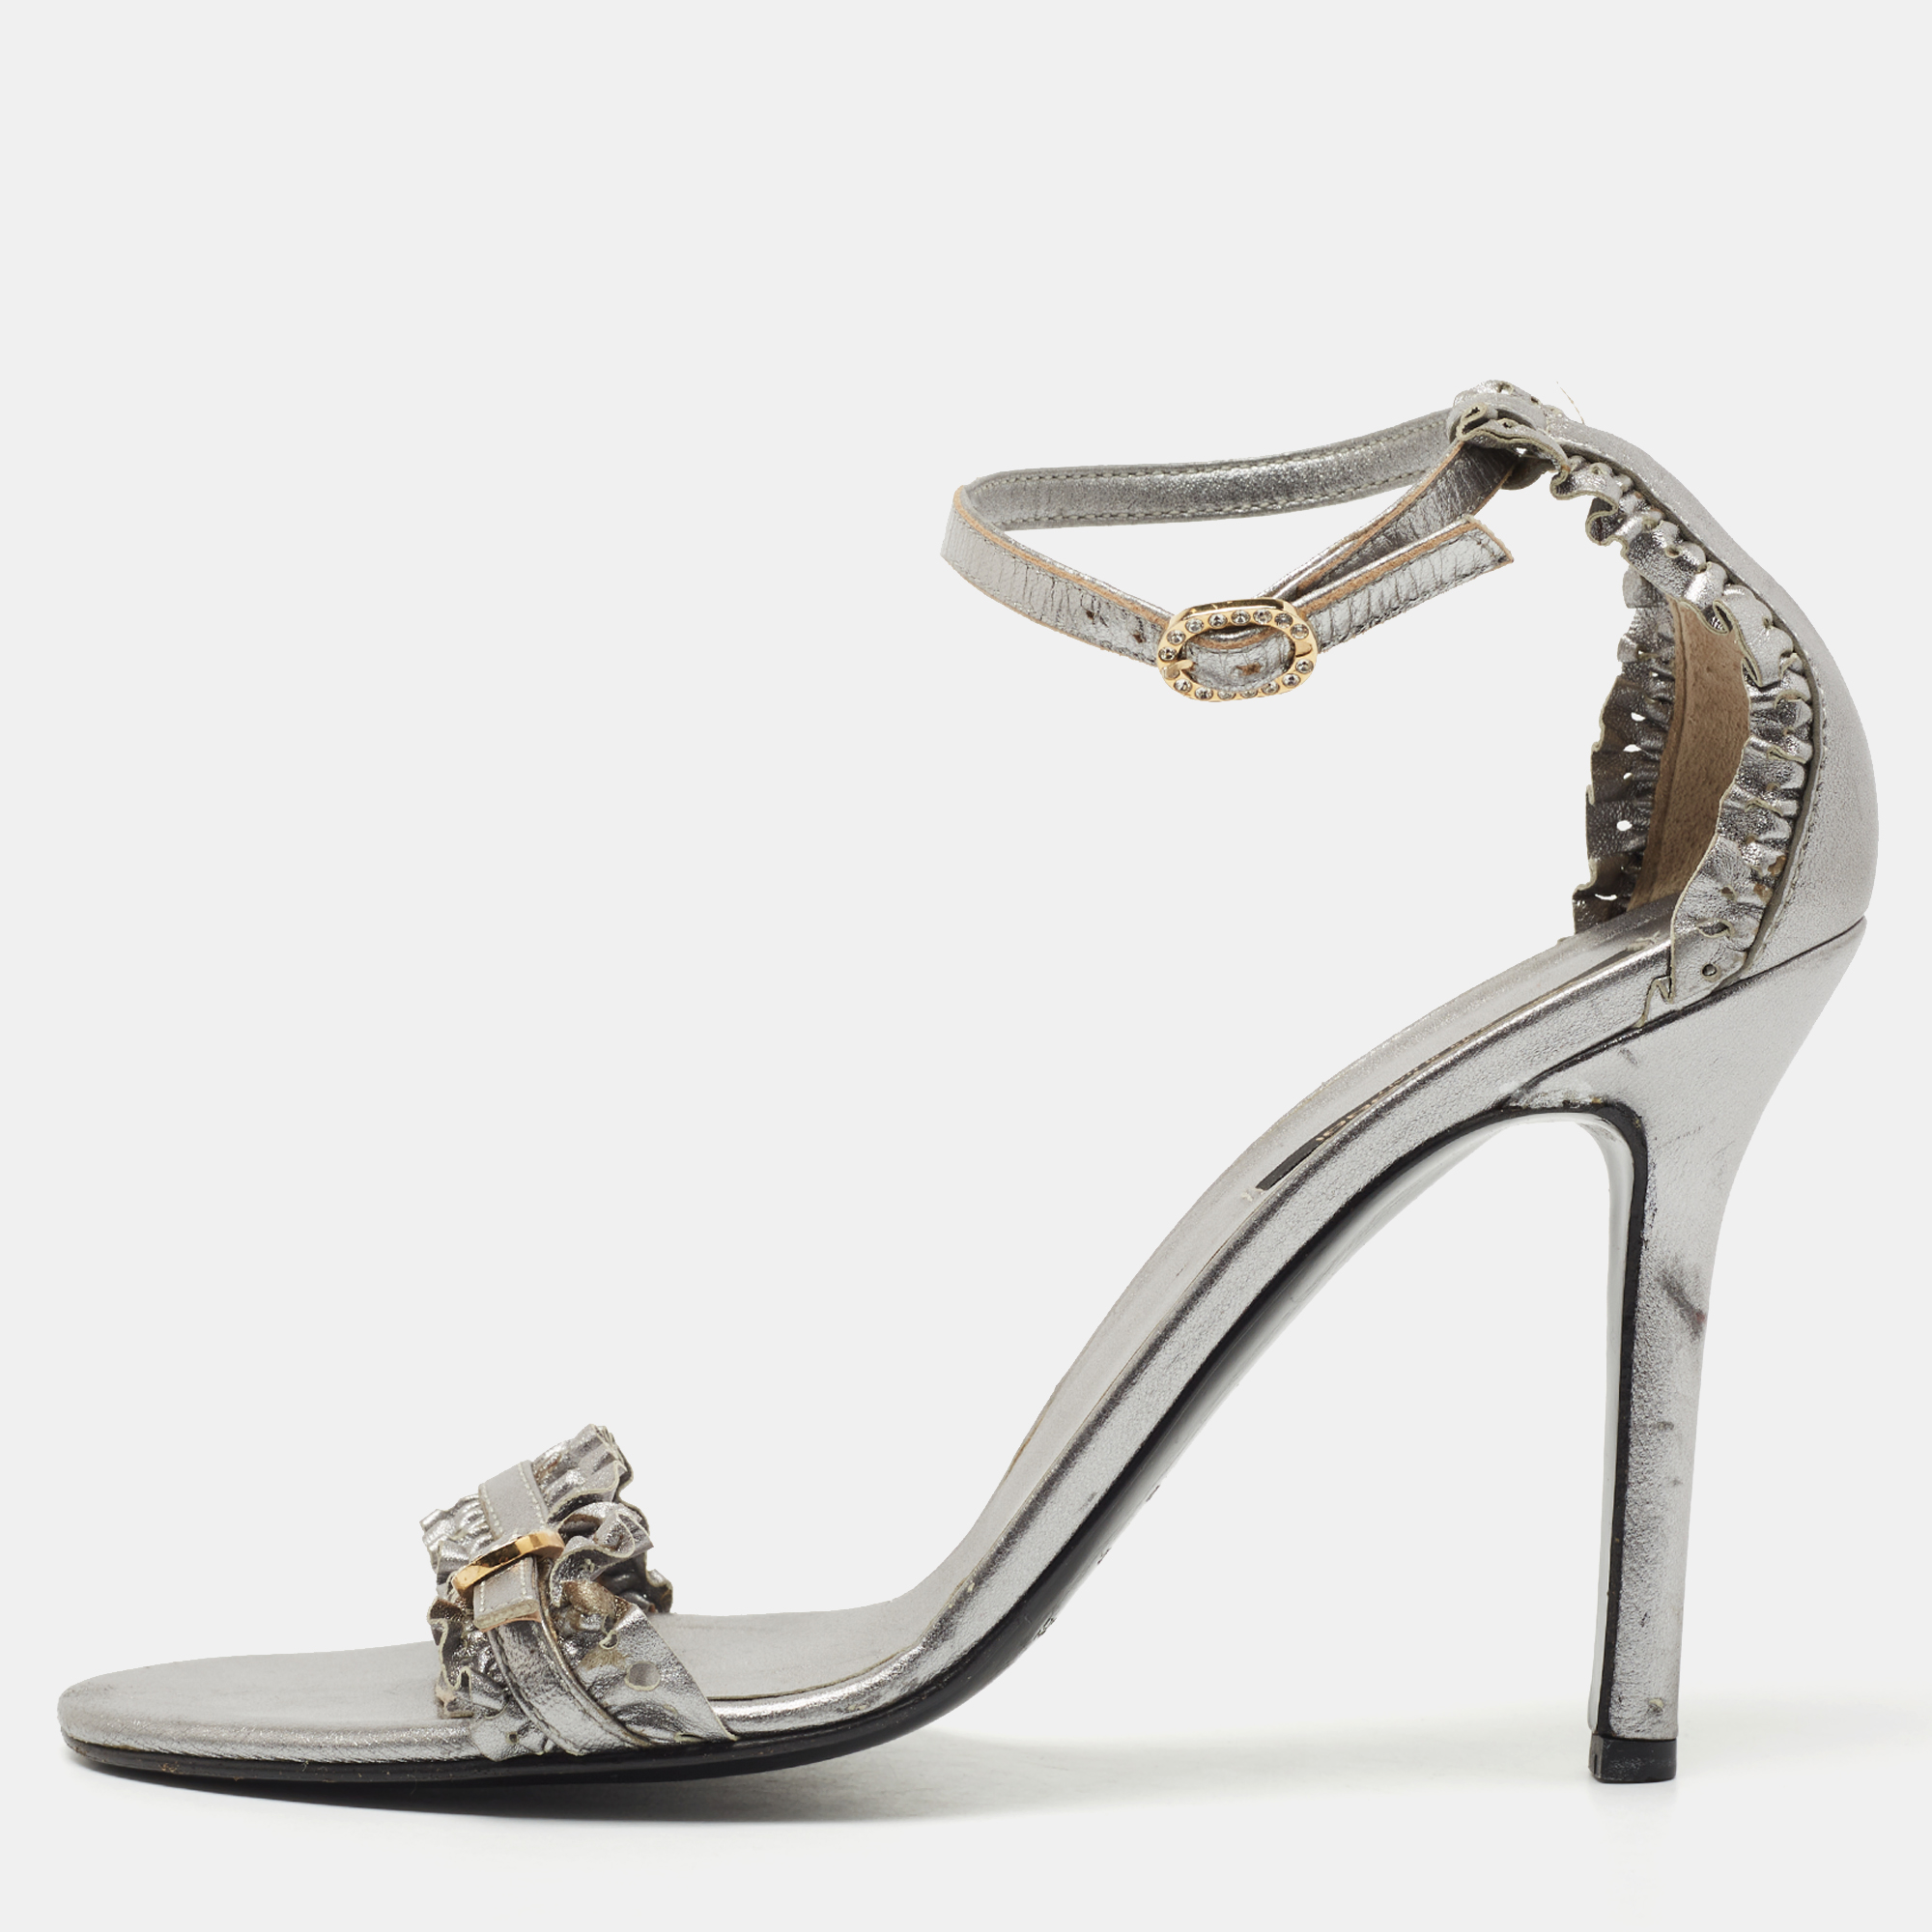 Sergio Rossi Metallic Grey Ruffle Leather Ankle Strap Sandals Size 40